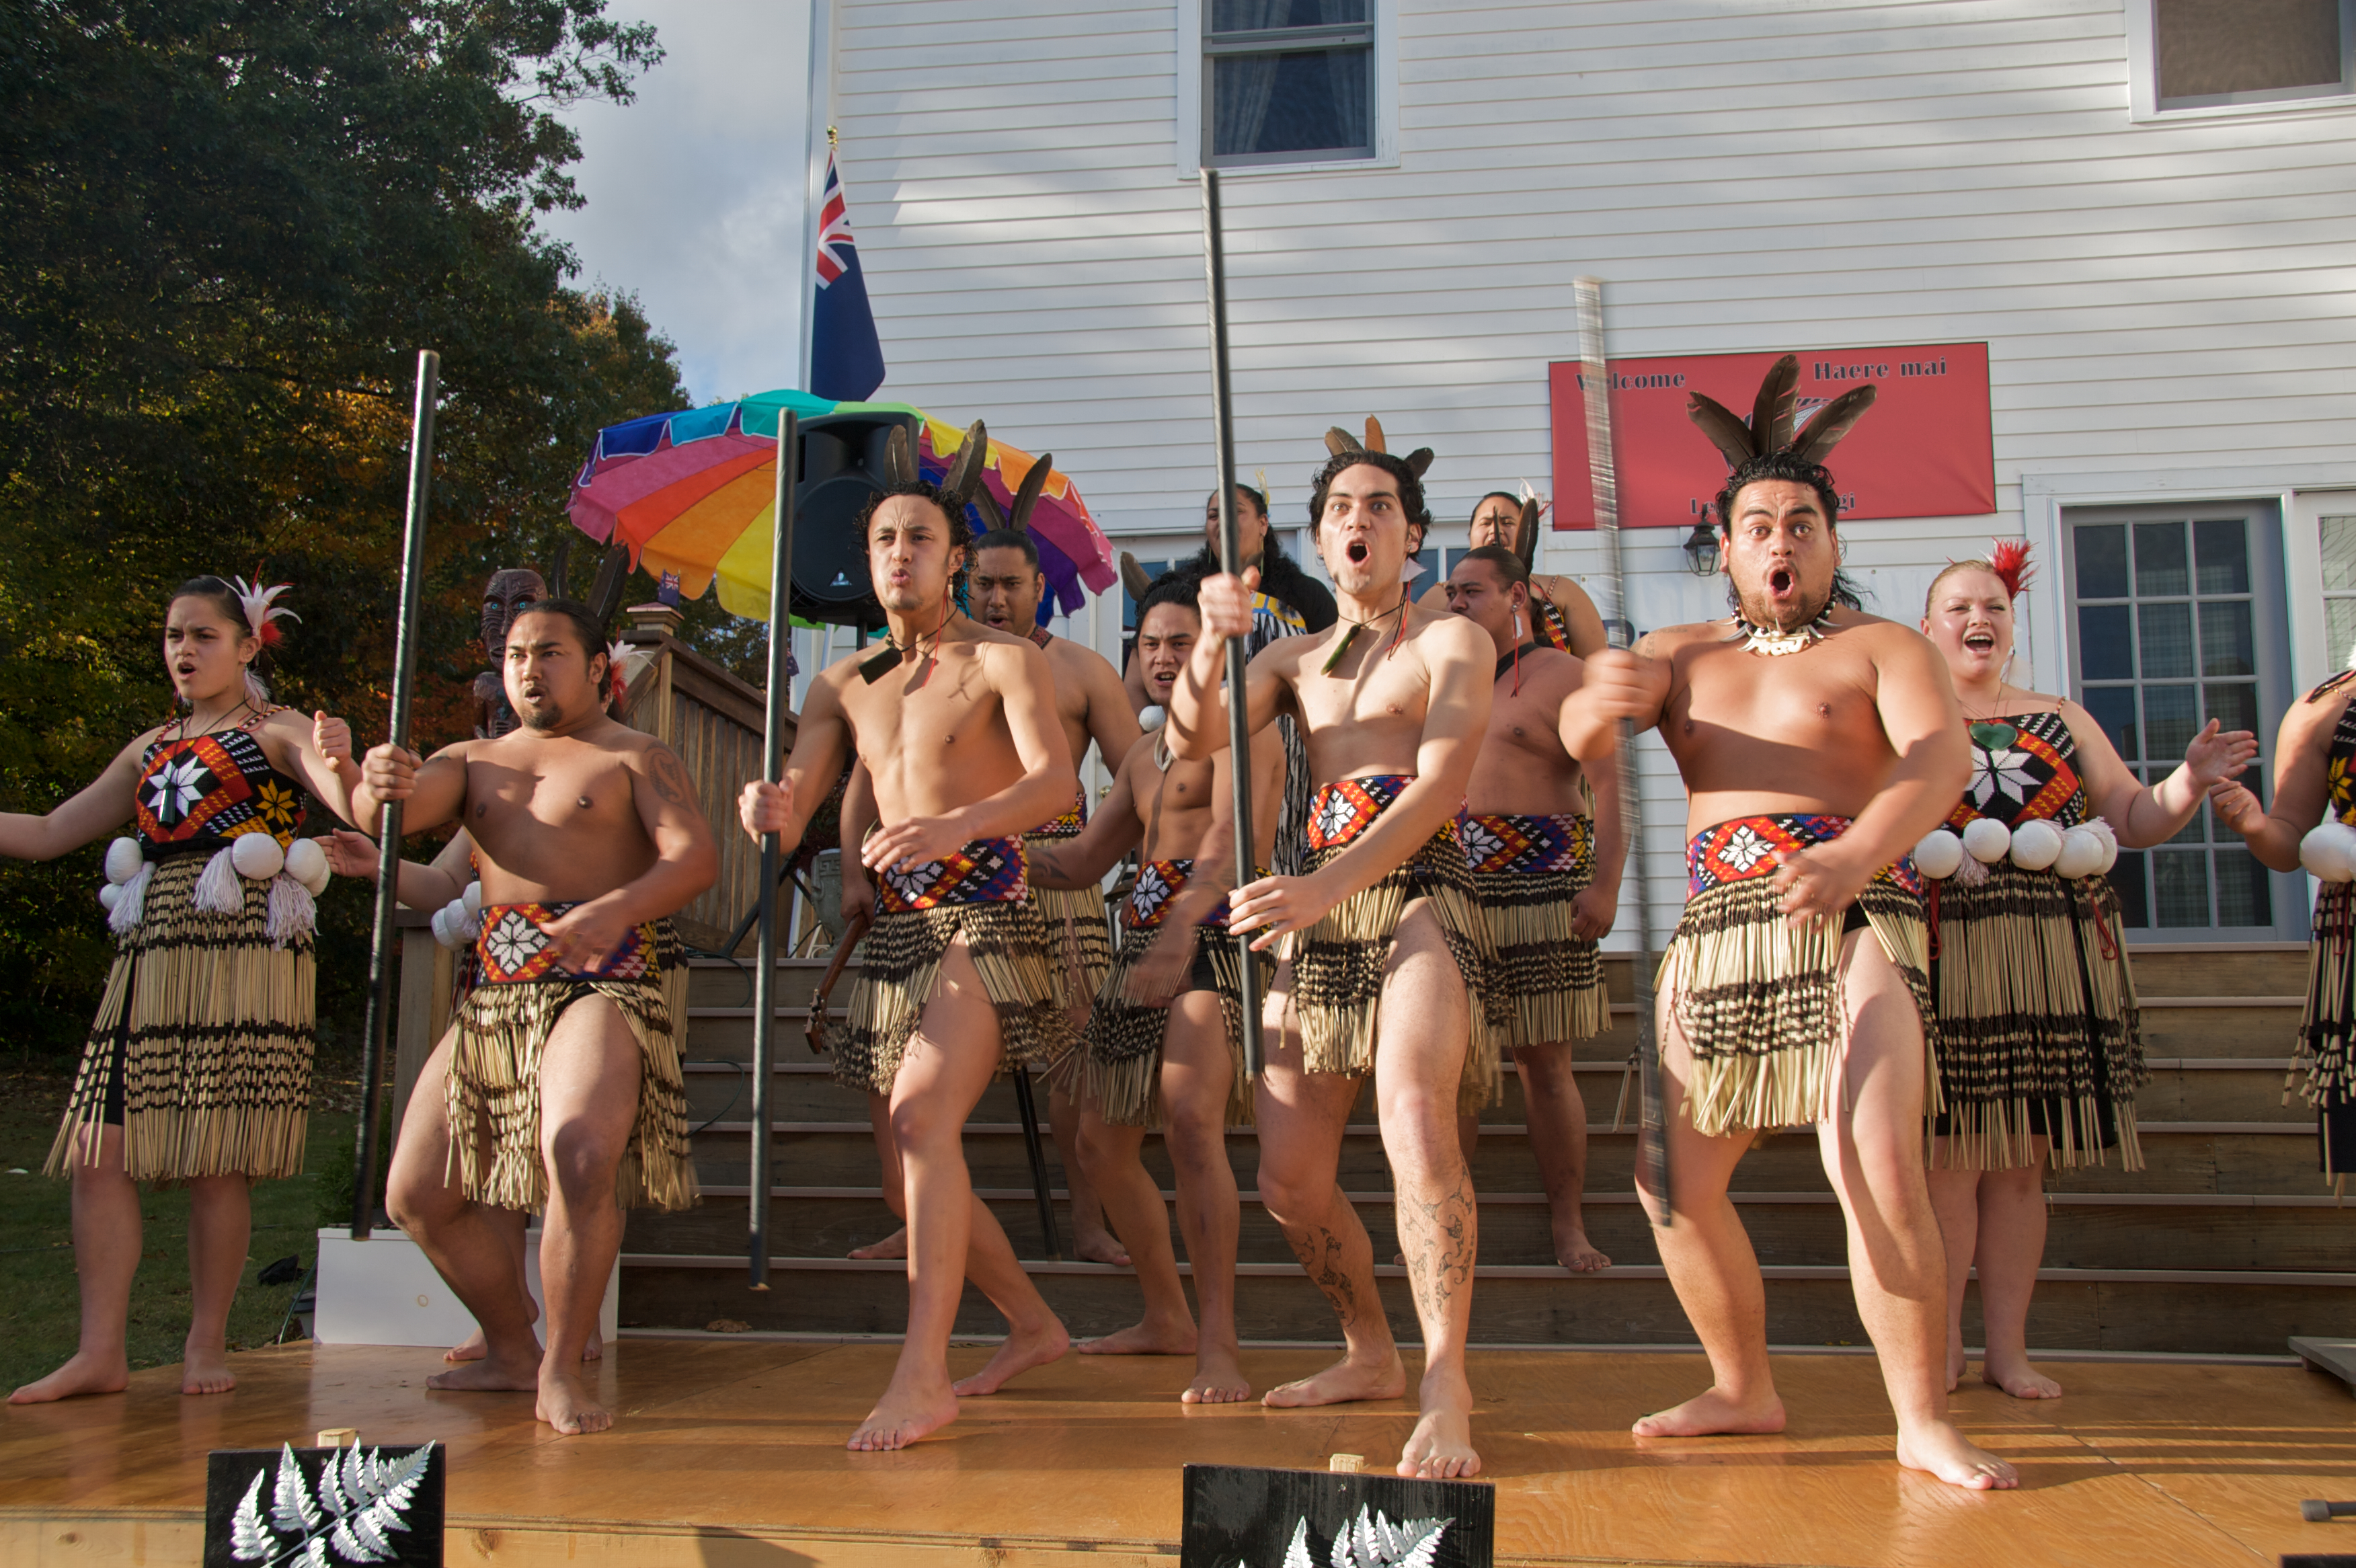 A performance by the Kahurangi Maori Dance group of New Zealand performing at the Leeming Hangi in Canterbury, New Hampshire. Photo taken on October 10, 2009.